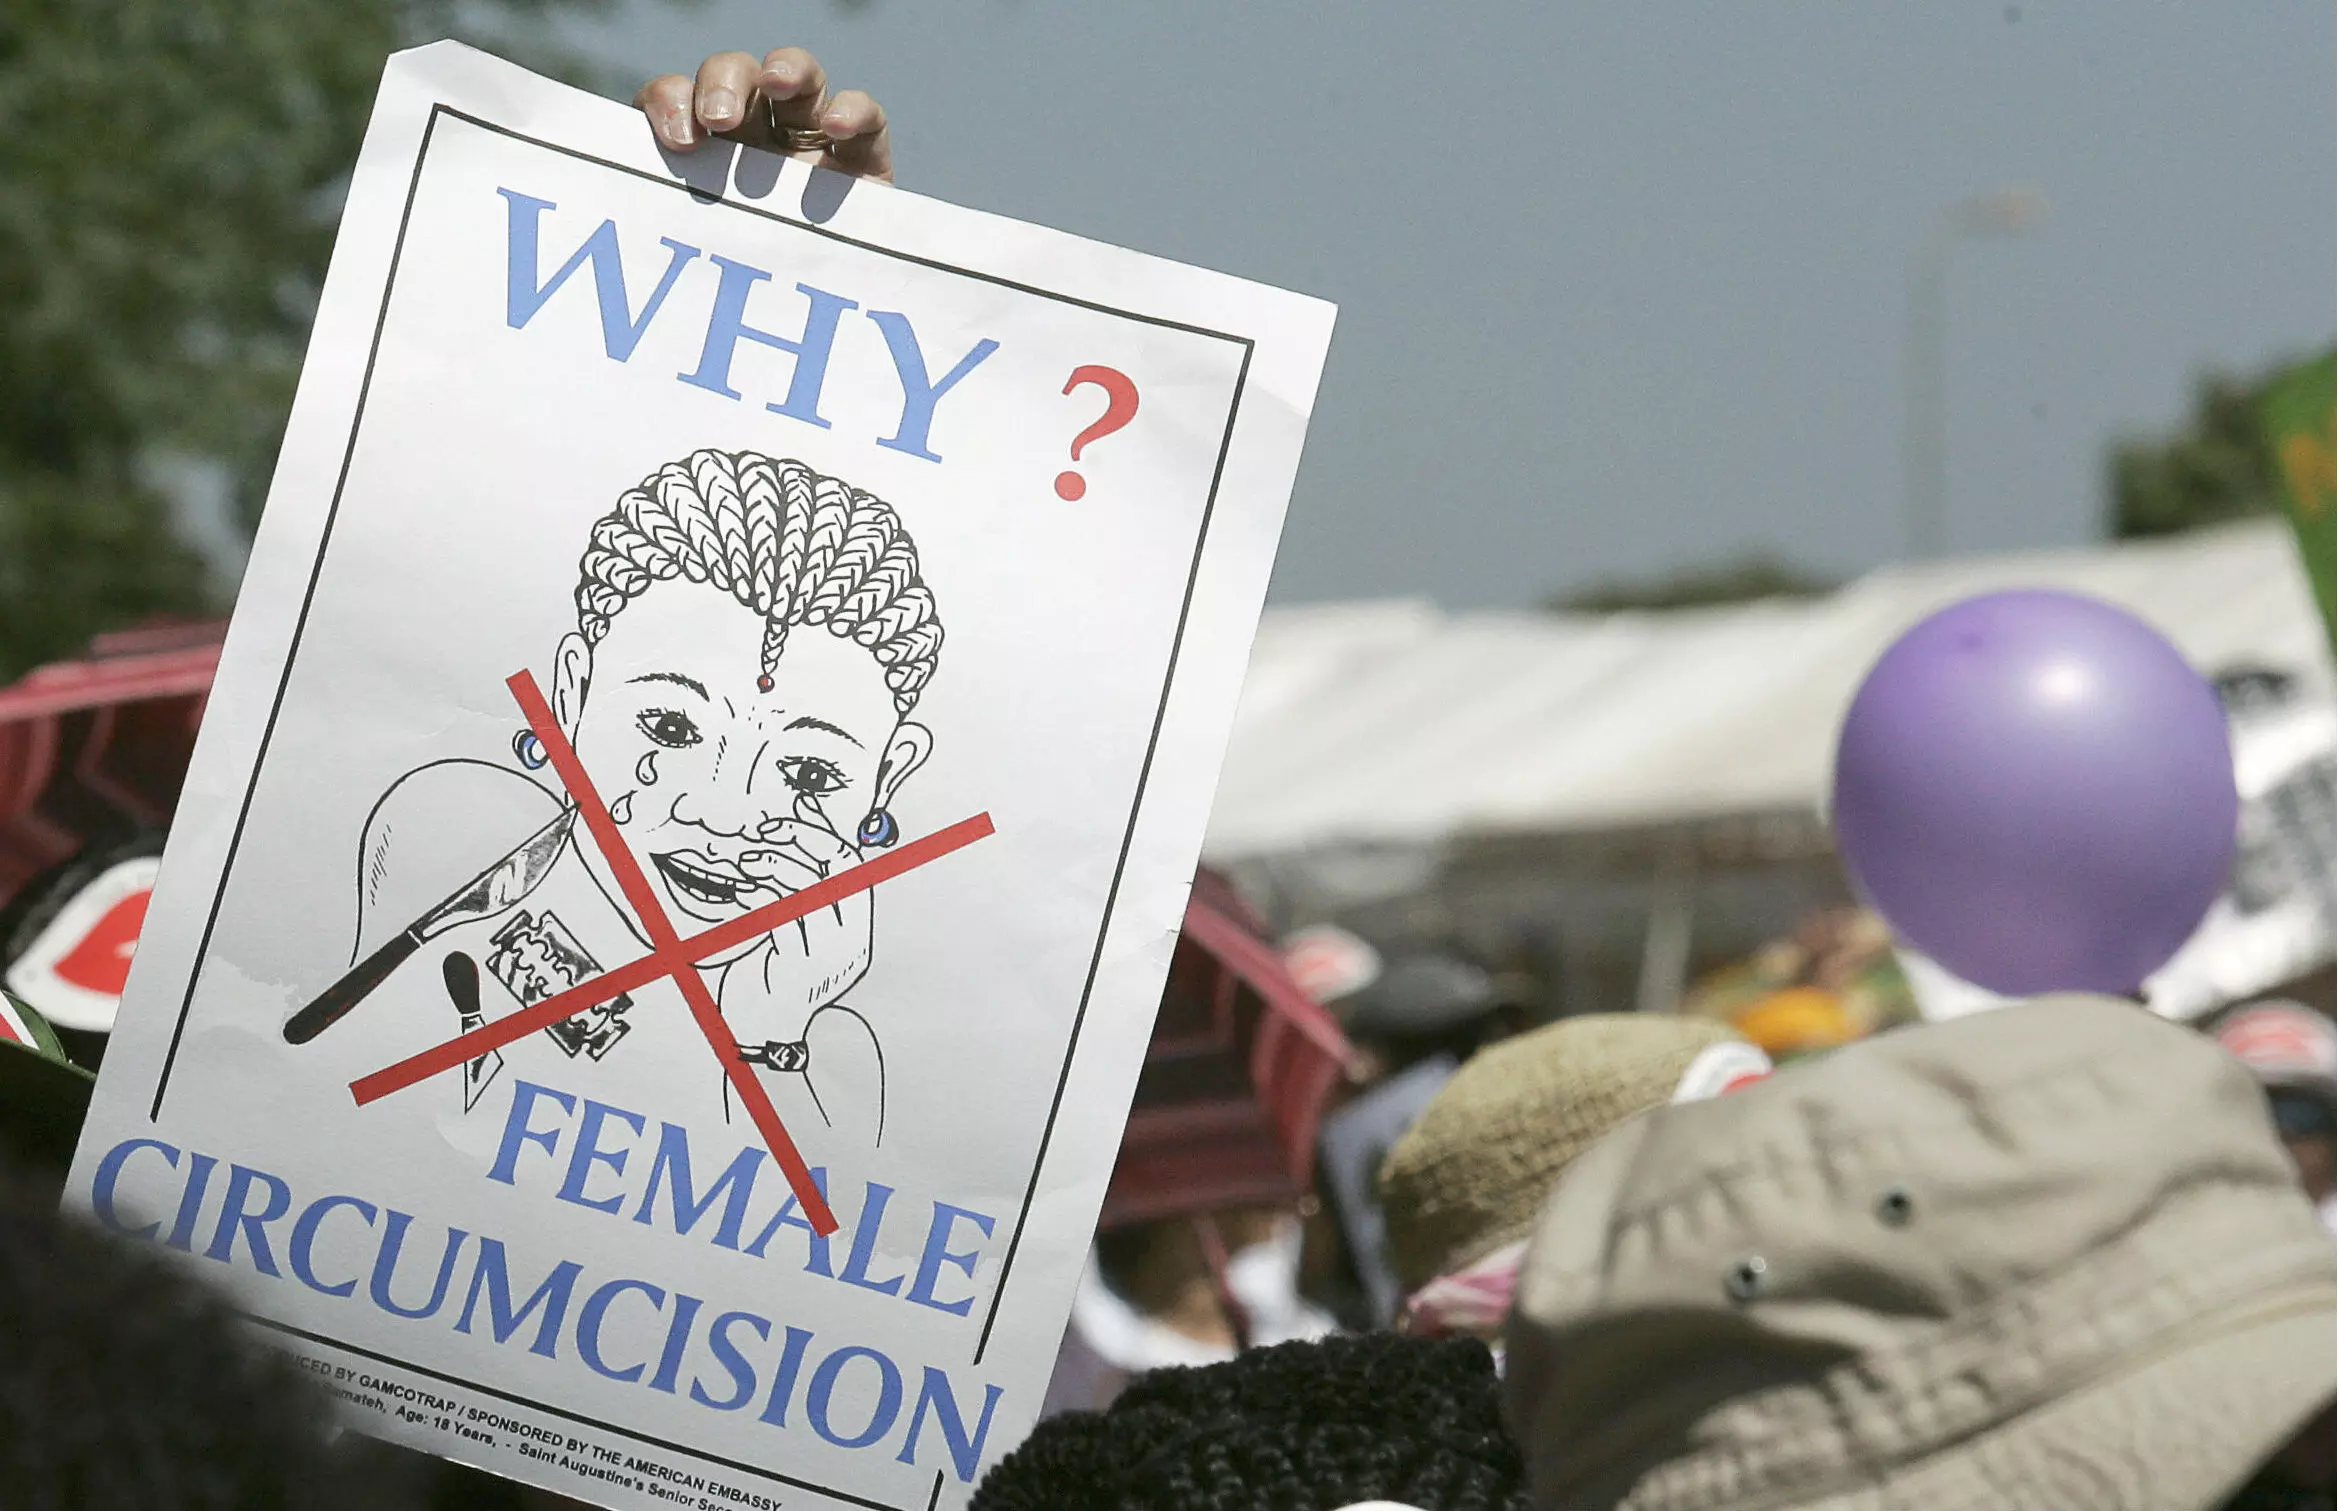 Female gentile mutilation a crime that must end